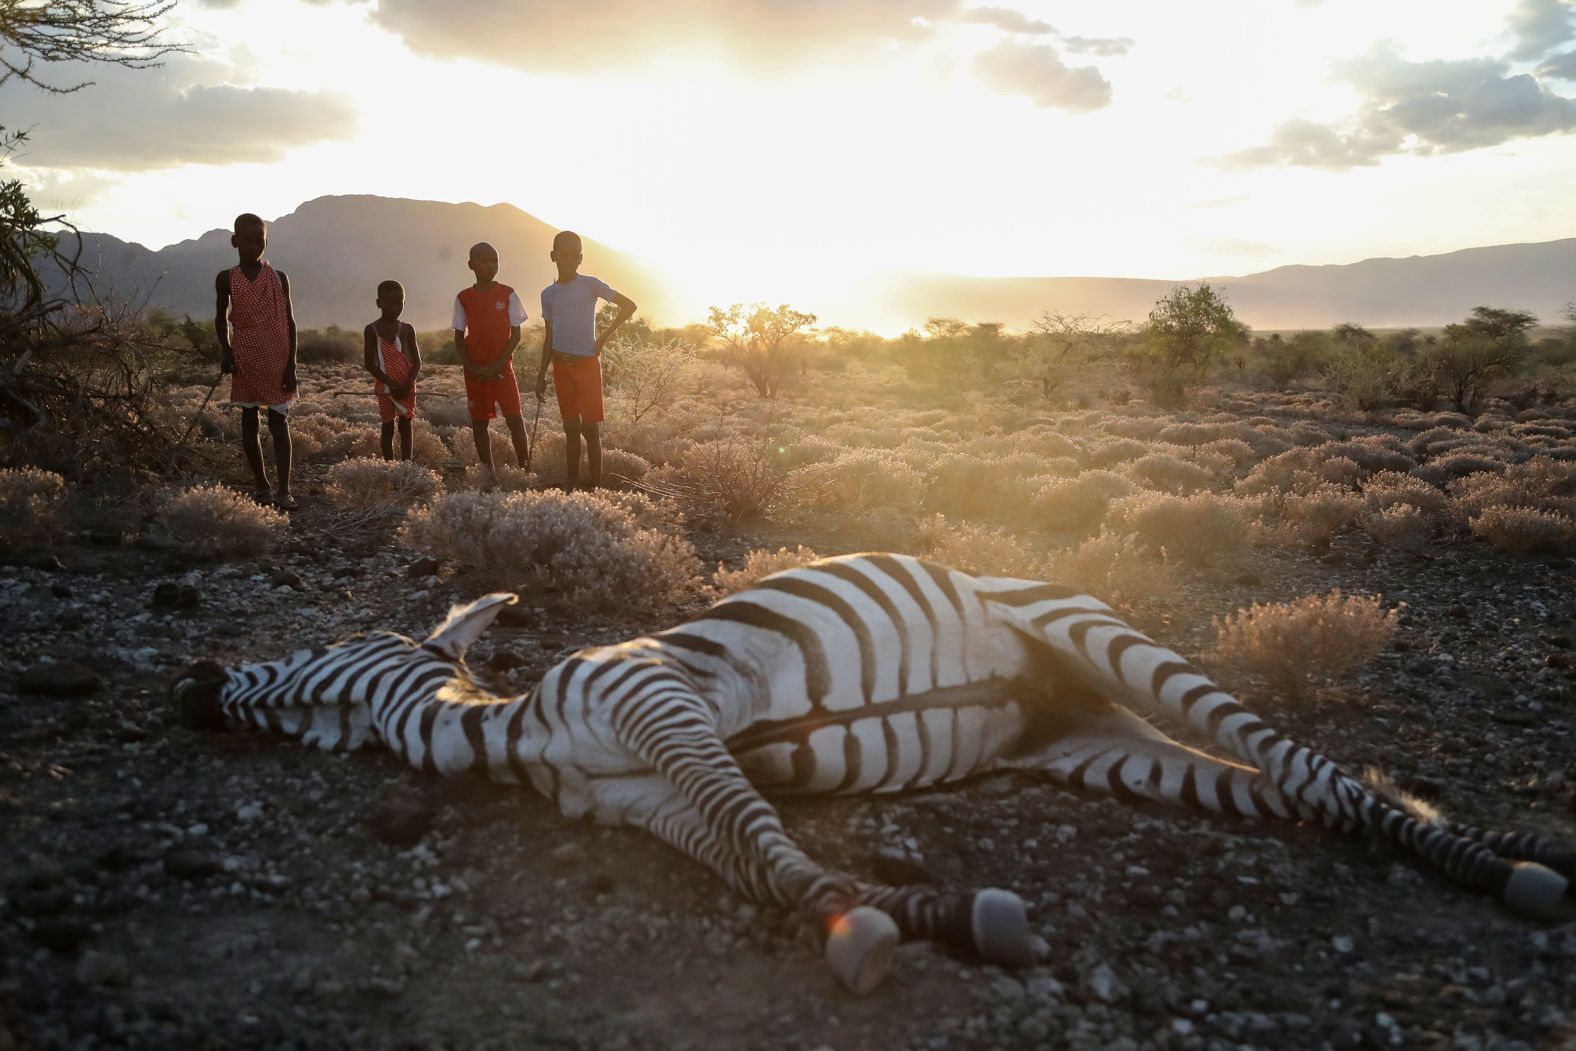 Children in the Kenyan village of Ilangeruani stand beside a zebra Wednesday, November 9, that local residents say died because of drought. A grueling two-year drought in Kenya <a href="https://www.cnn.com/2022/10/05/africa/kenya-drought-wildlife-climate-intl-cmd" target="_blank">has wiped out 2% of the world's rarest zebra species</a> and increased elephant deaths as well.